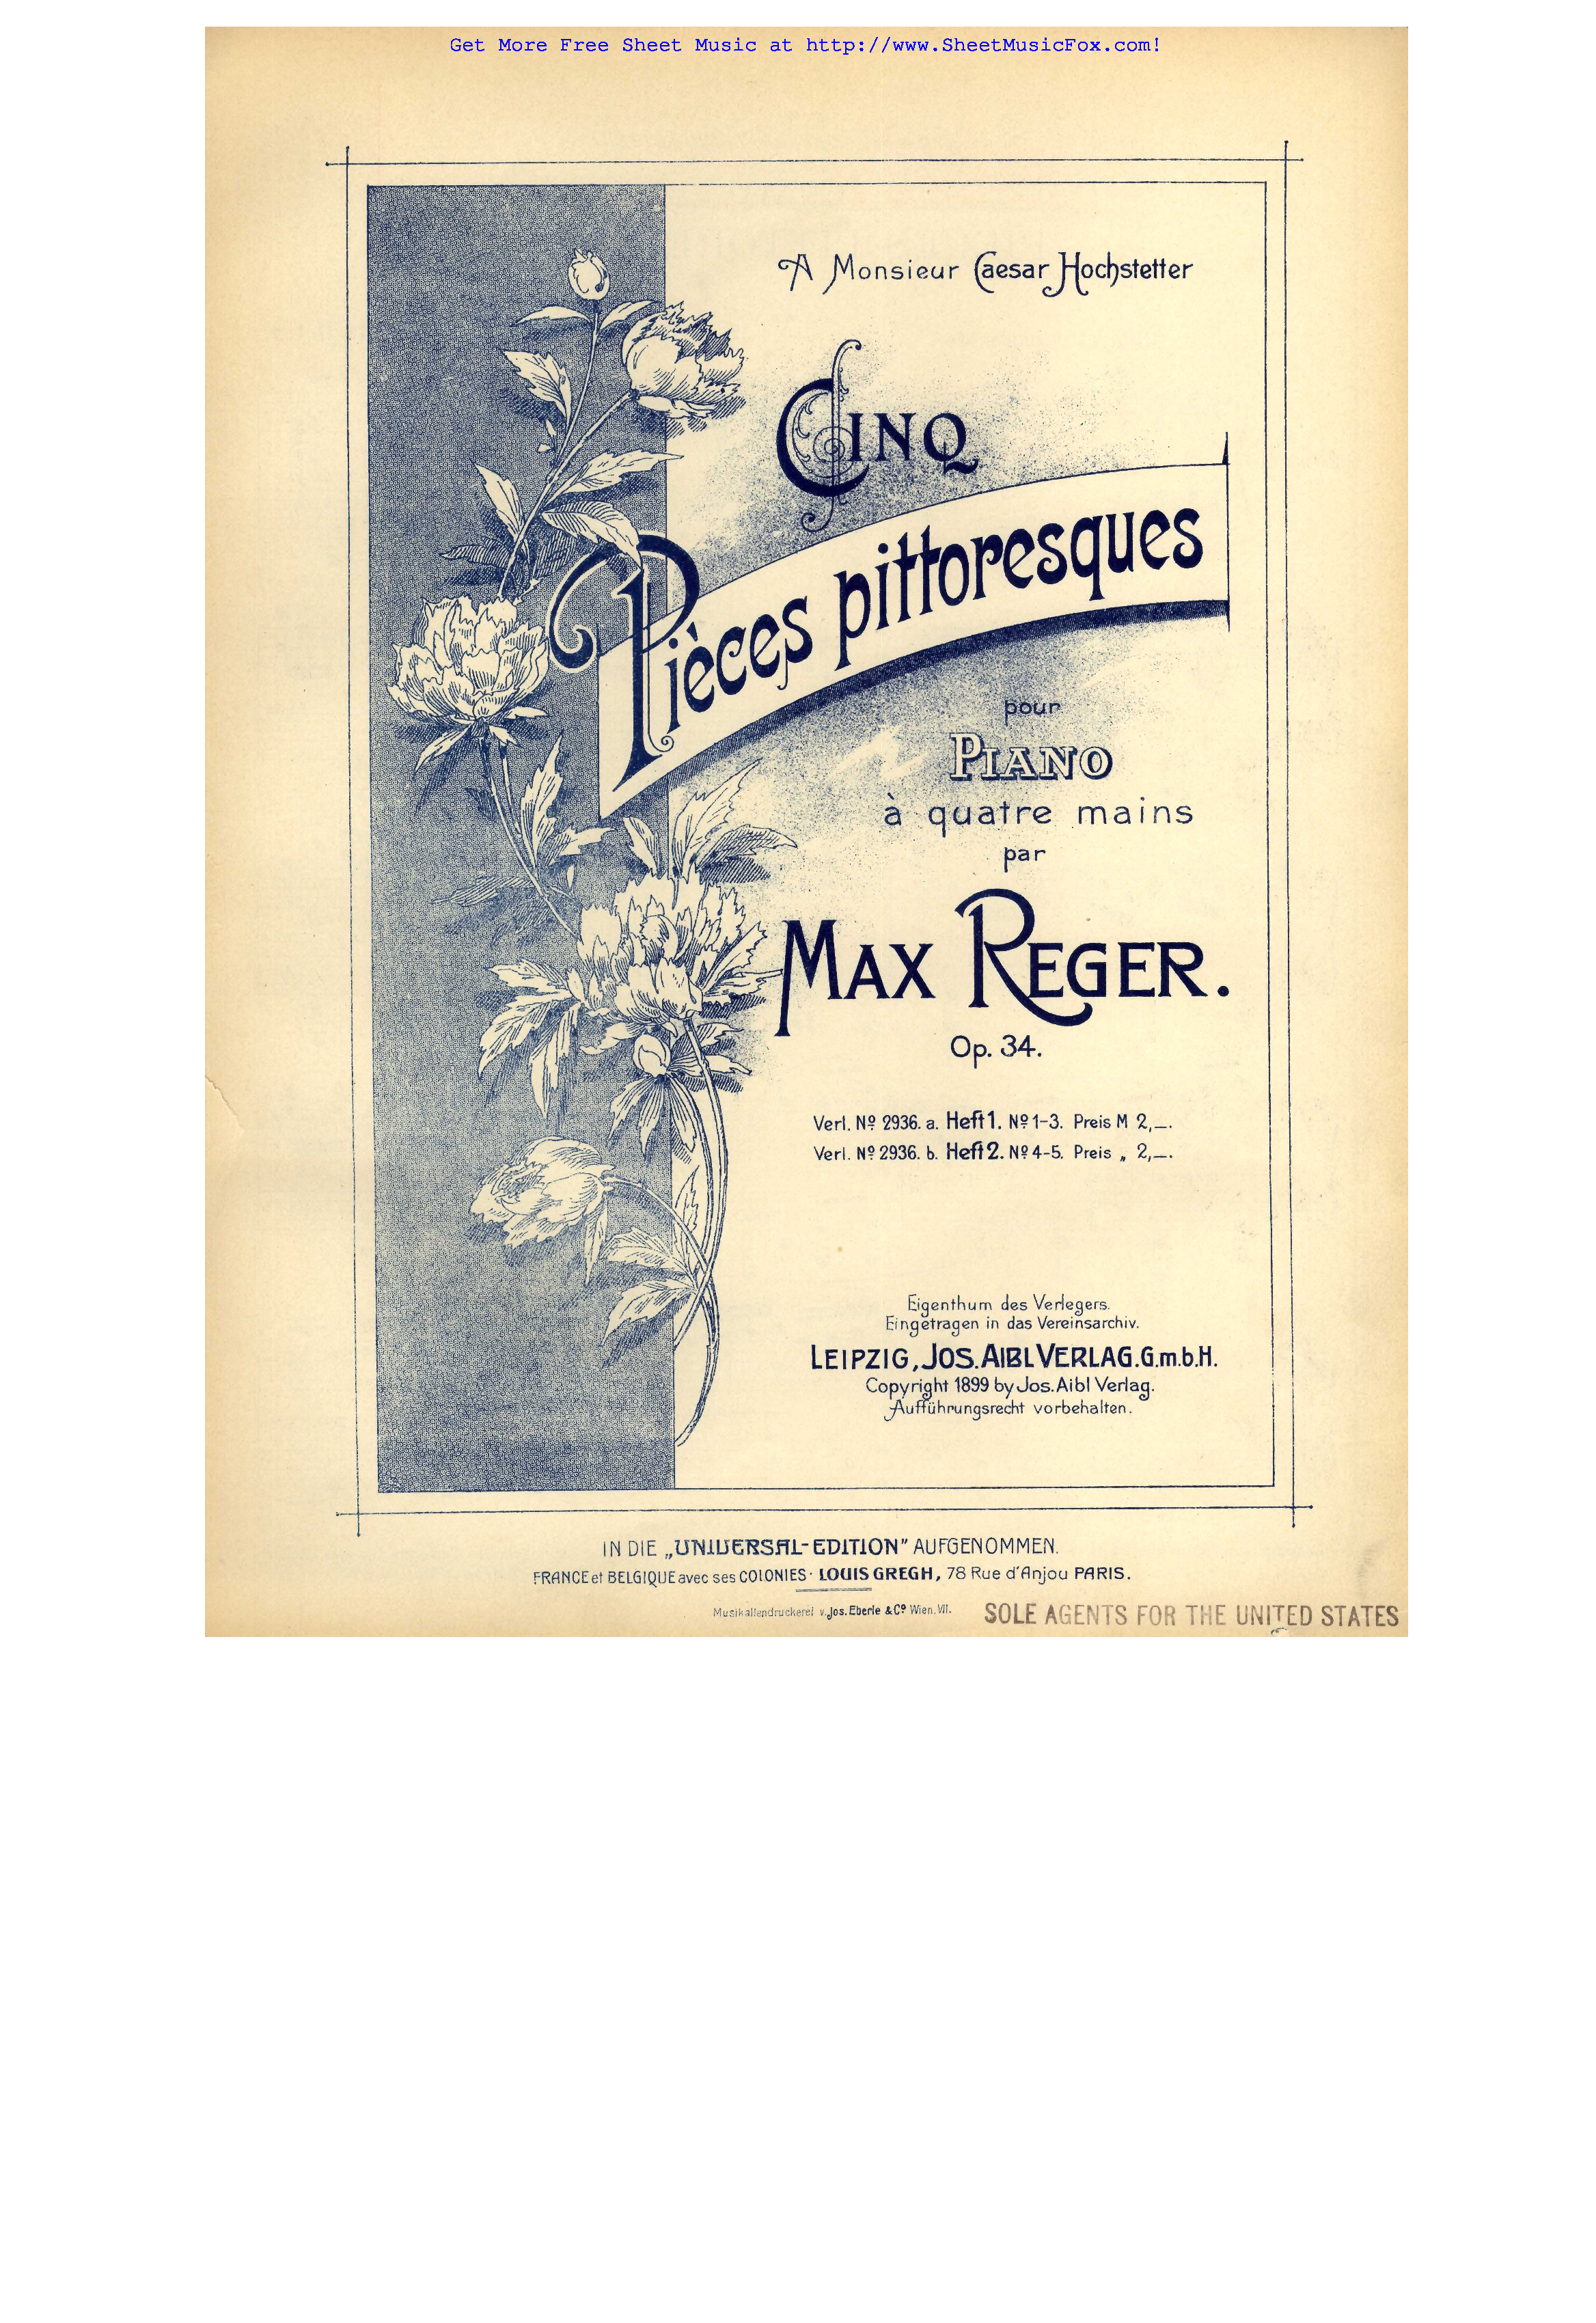 Free sheet music for 5 Pièces pittoresques, Op.34 (Reger, Max) by Max Reger